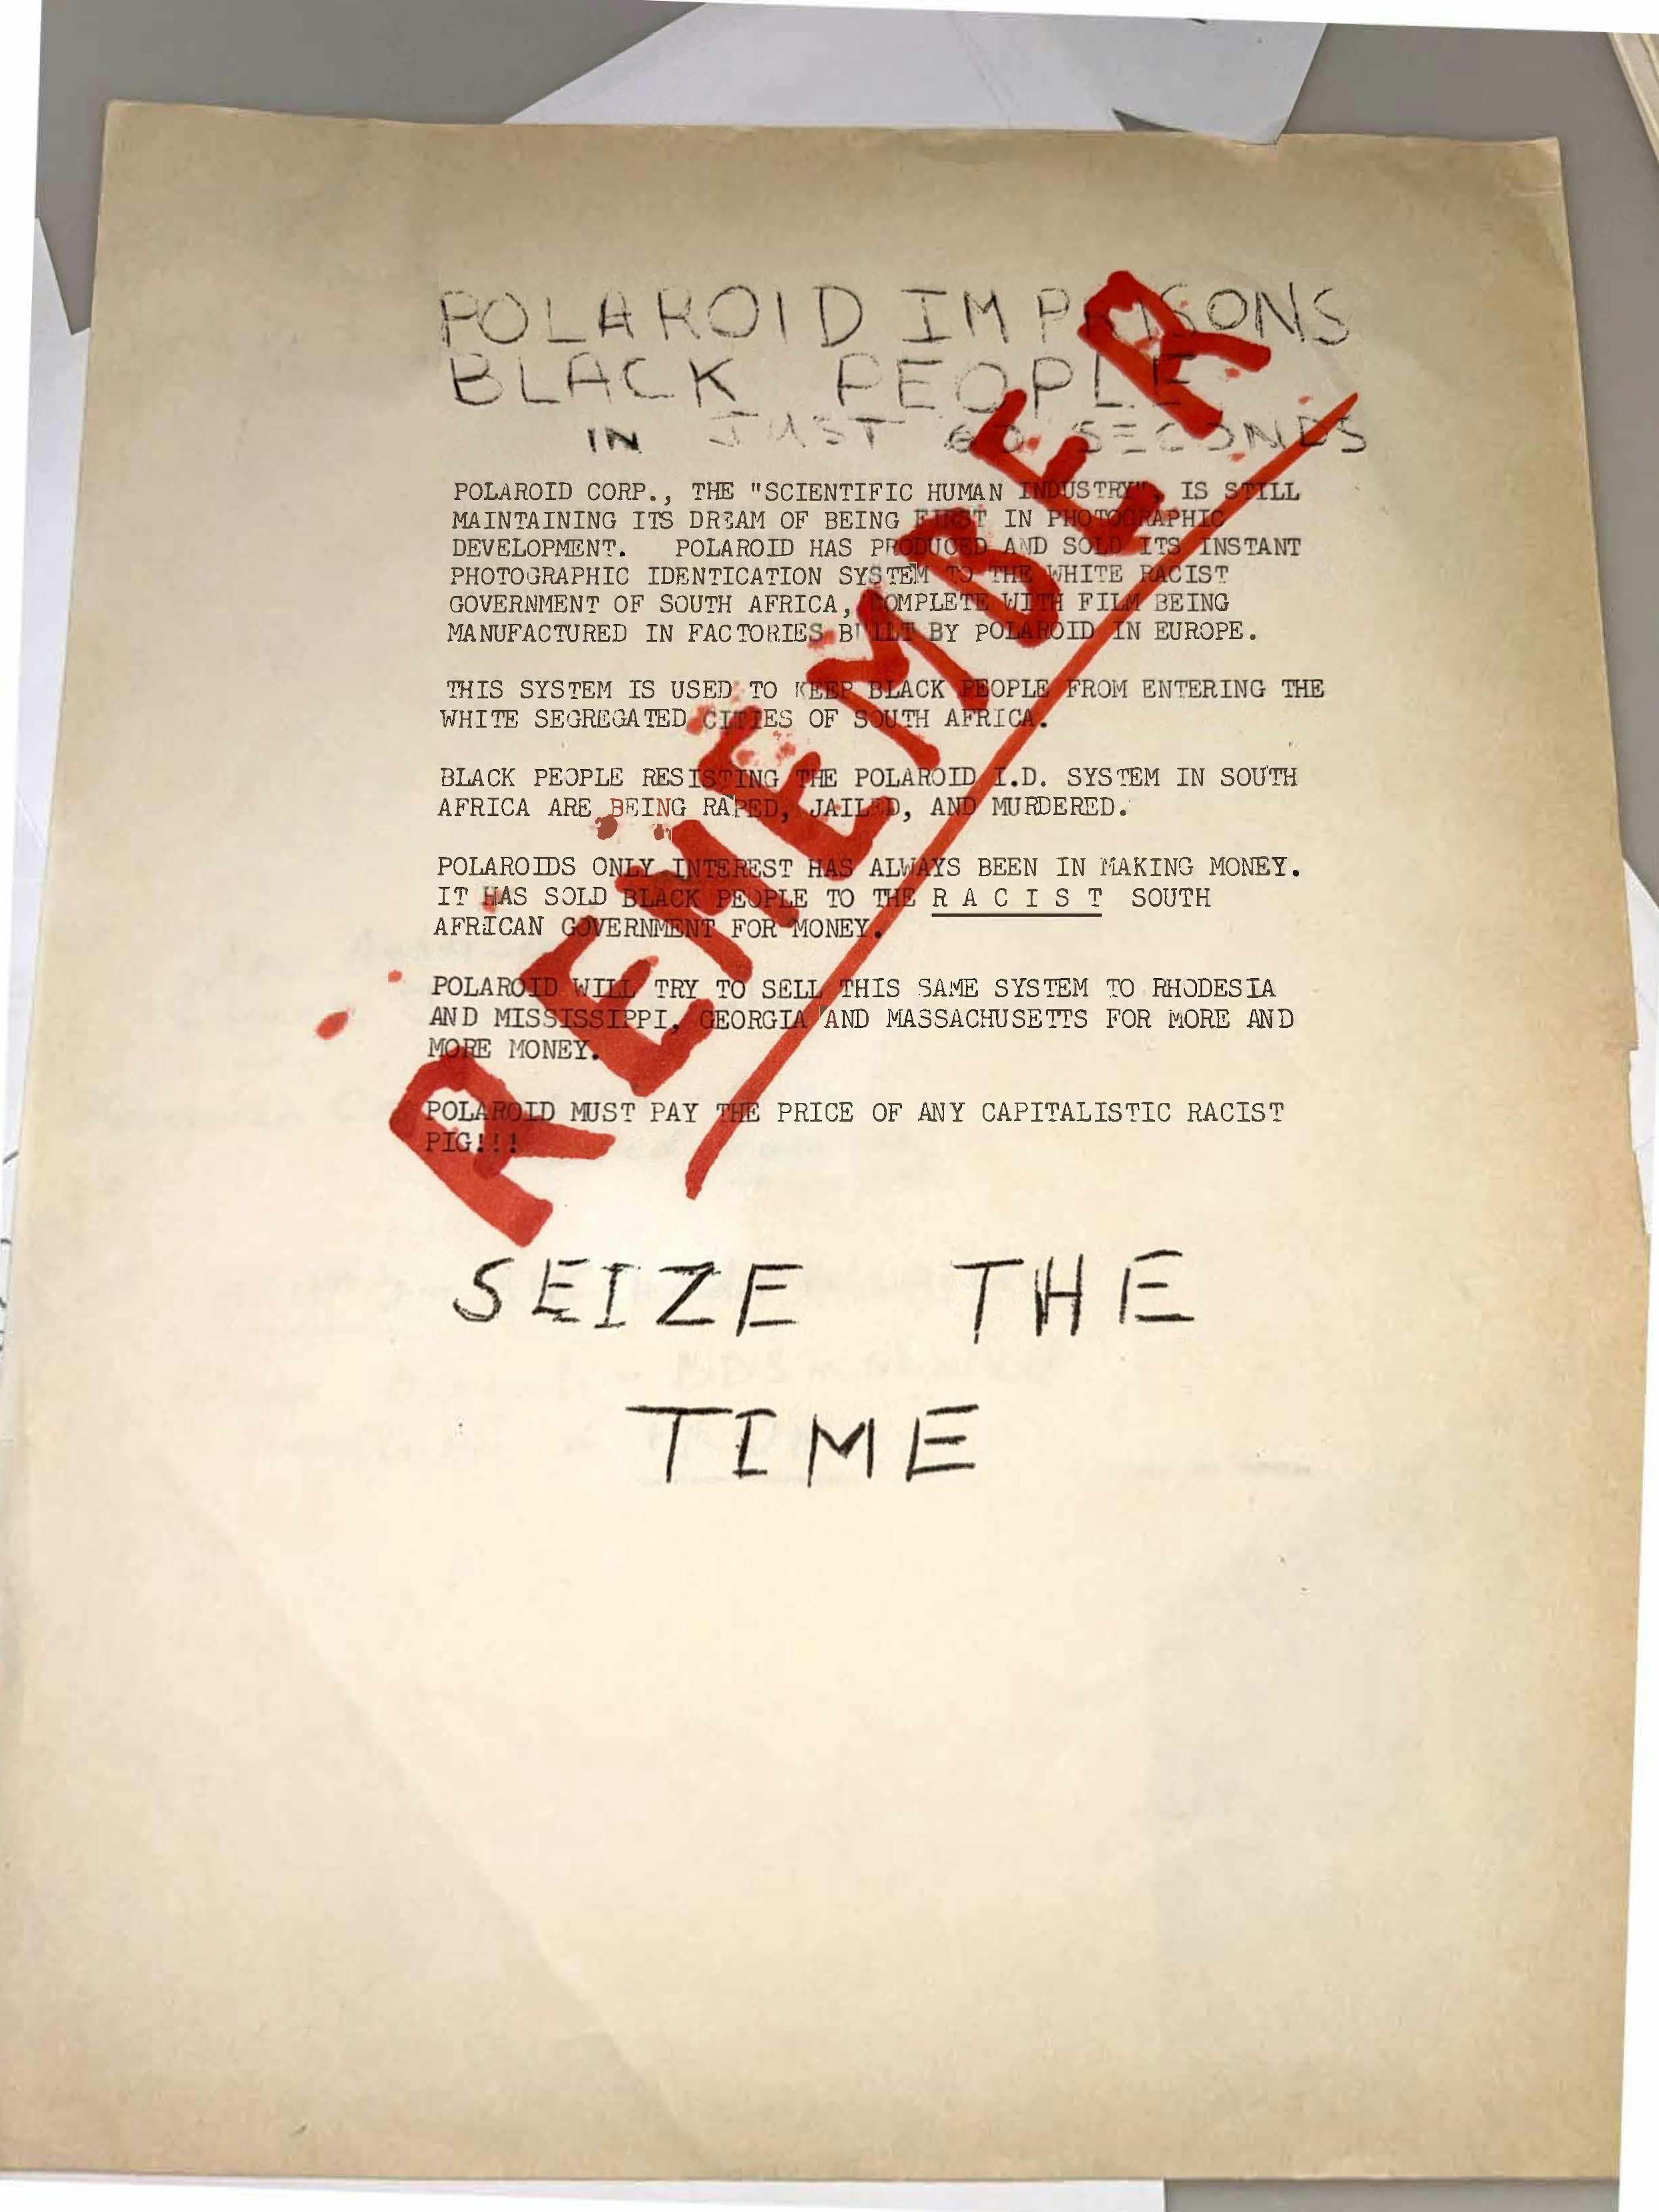 PRWM leaflet calling attention to Polaroid’s complicity in apartheid South Africa, with the word "Seize the time," written in all caps at the bottom